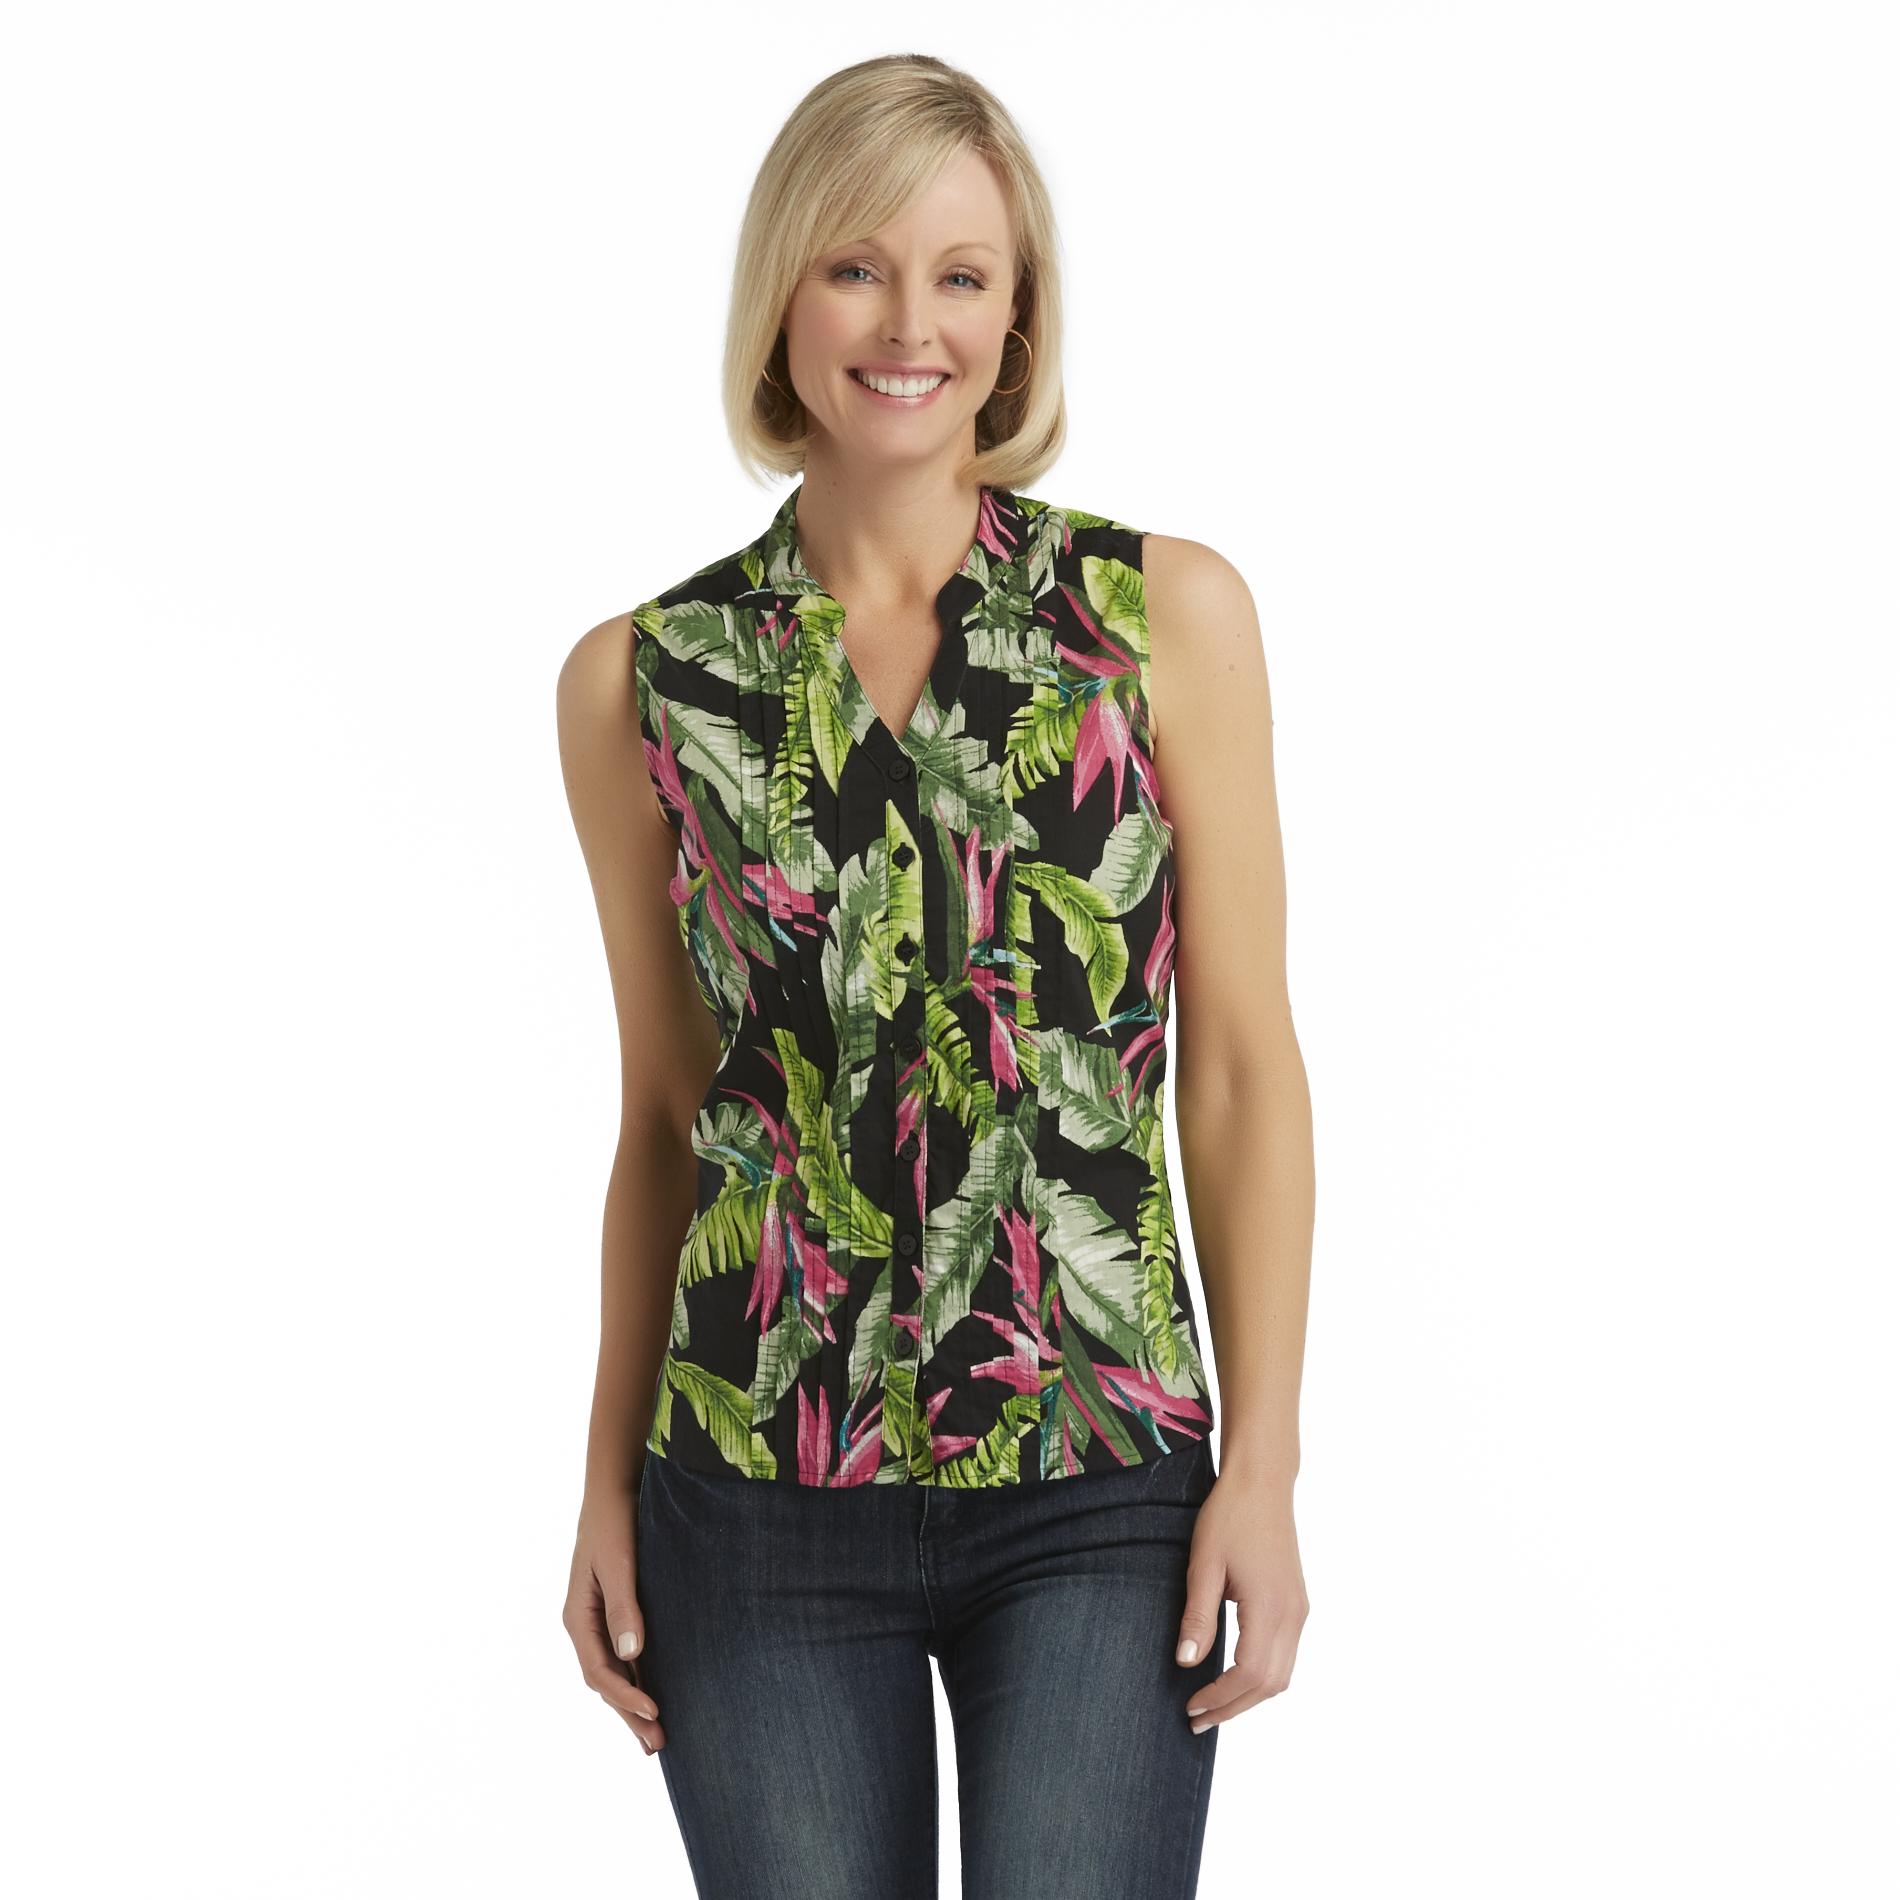 Basic Editions Women's Pintucked Top - Floral